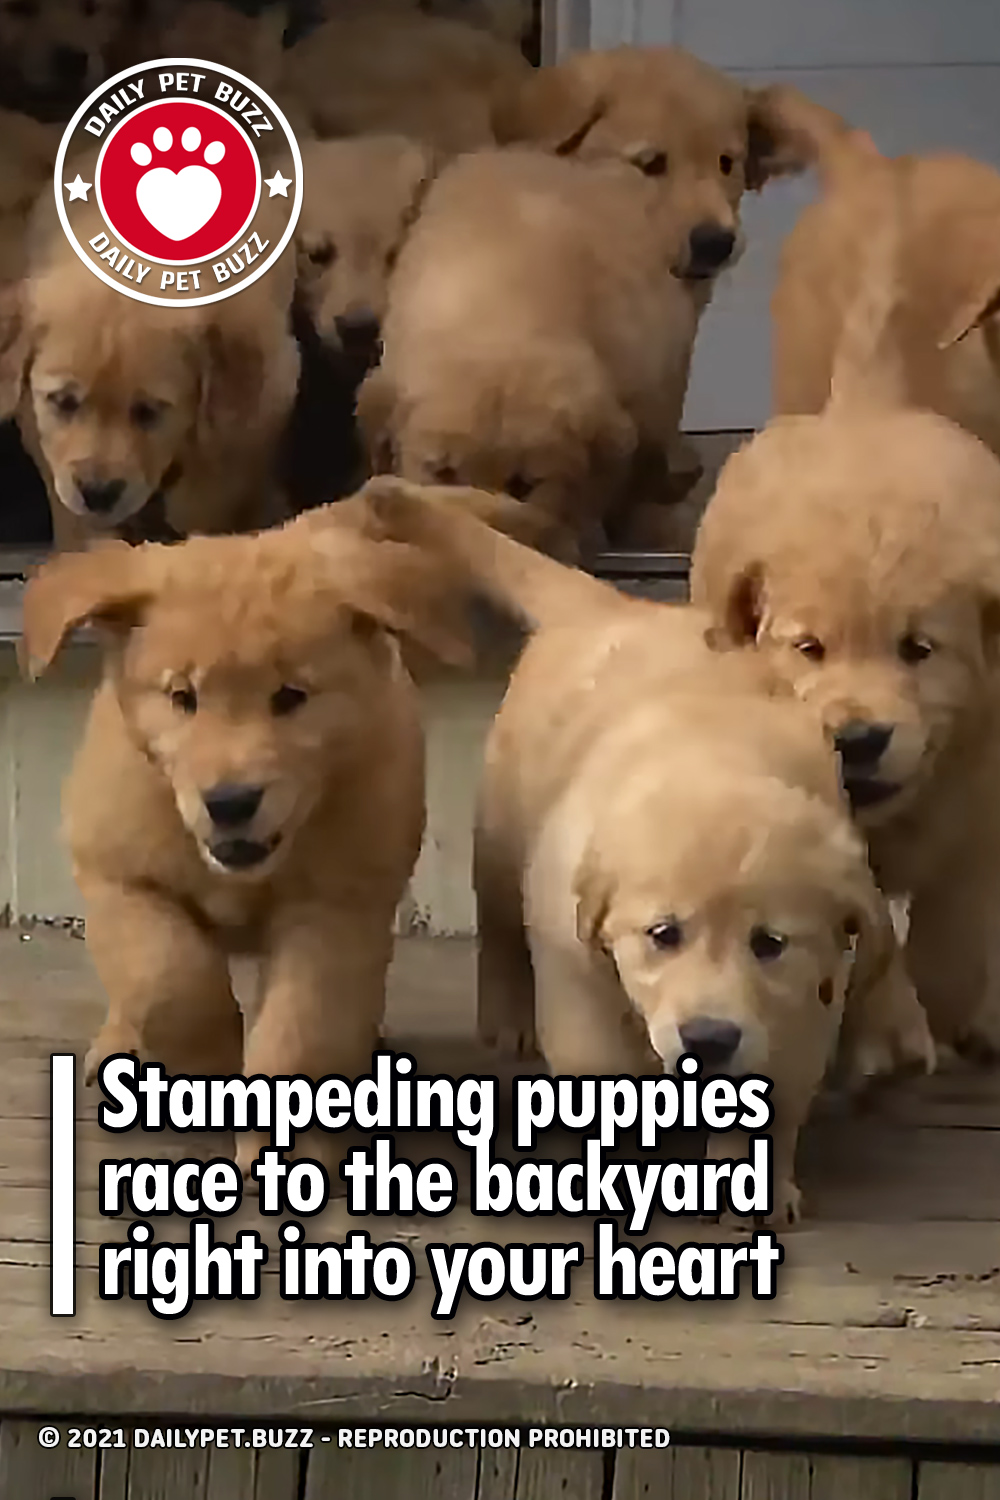 Stampeding puppies race to the backyard right into your heart